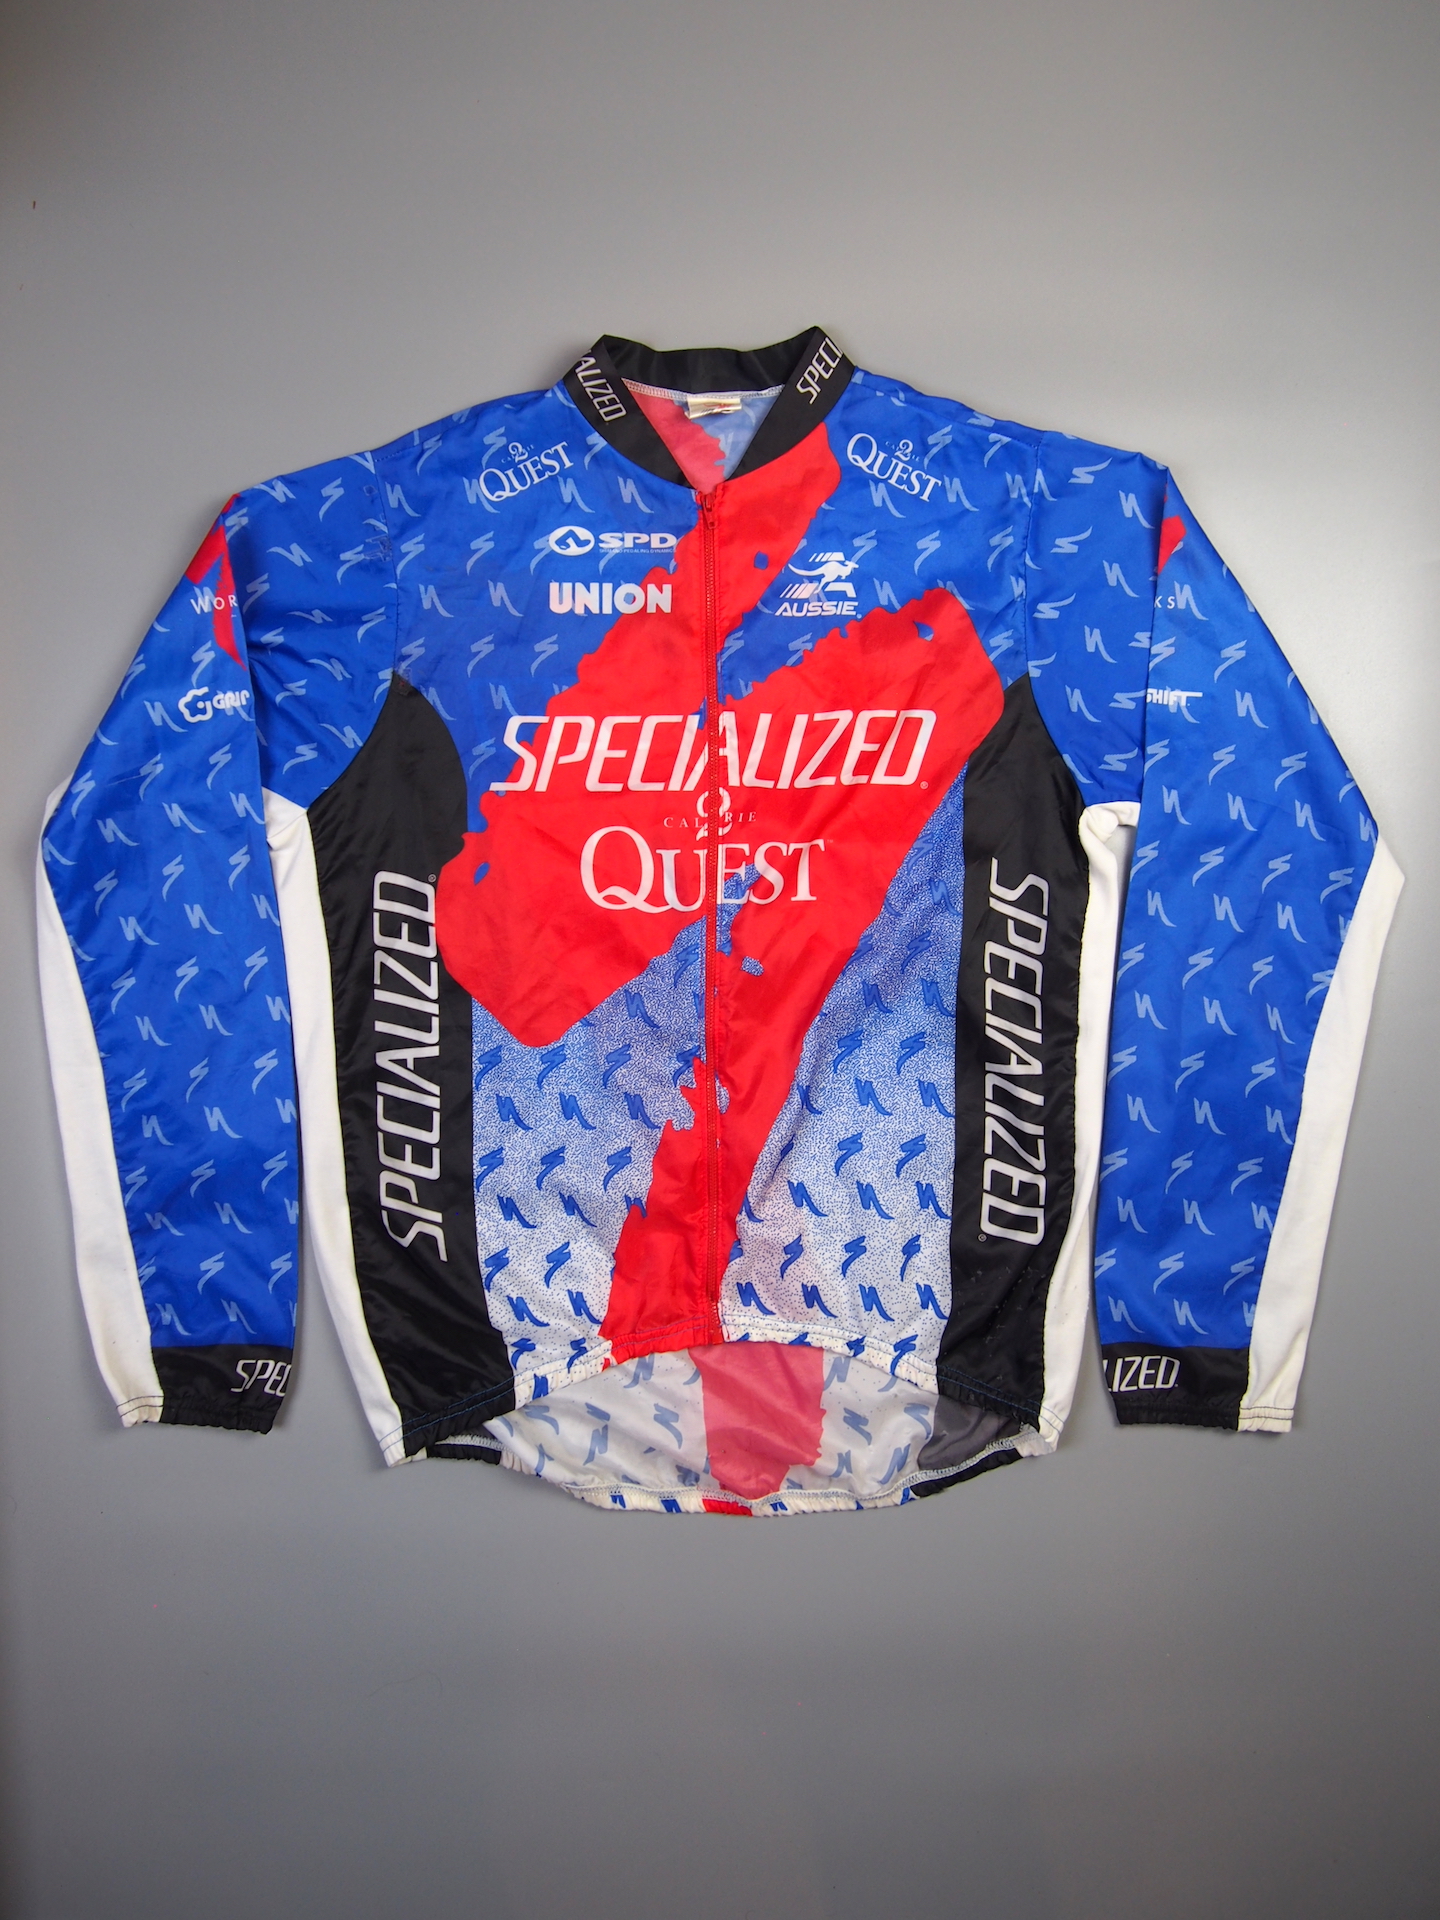 Specialized S Works Quest Team Jacket – Blue, Red, Black & White